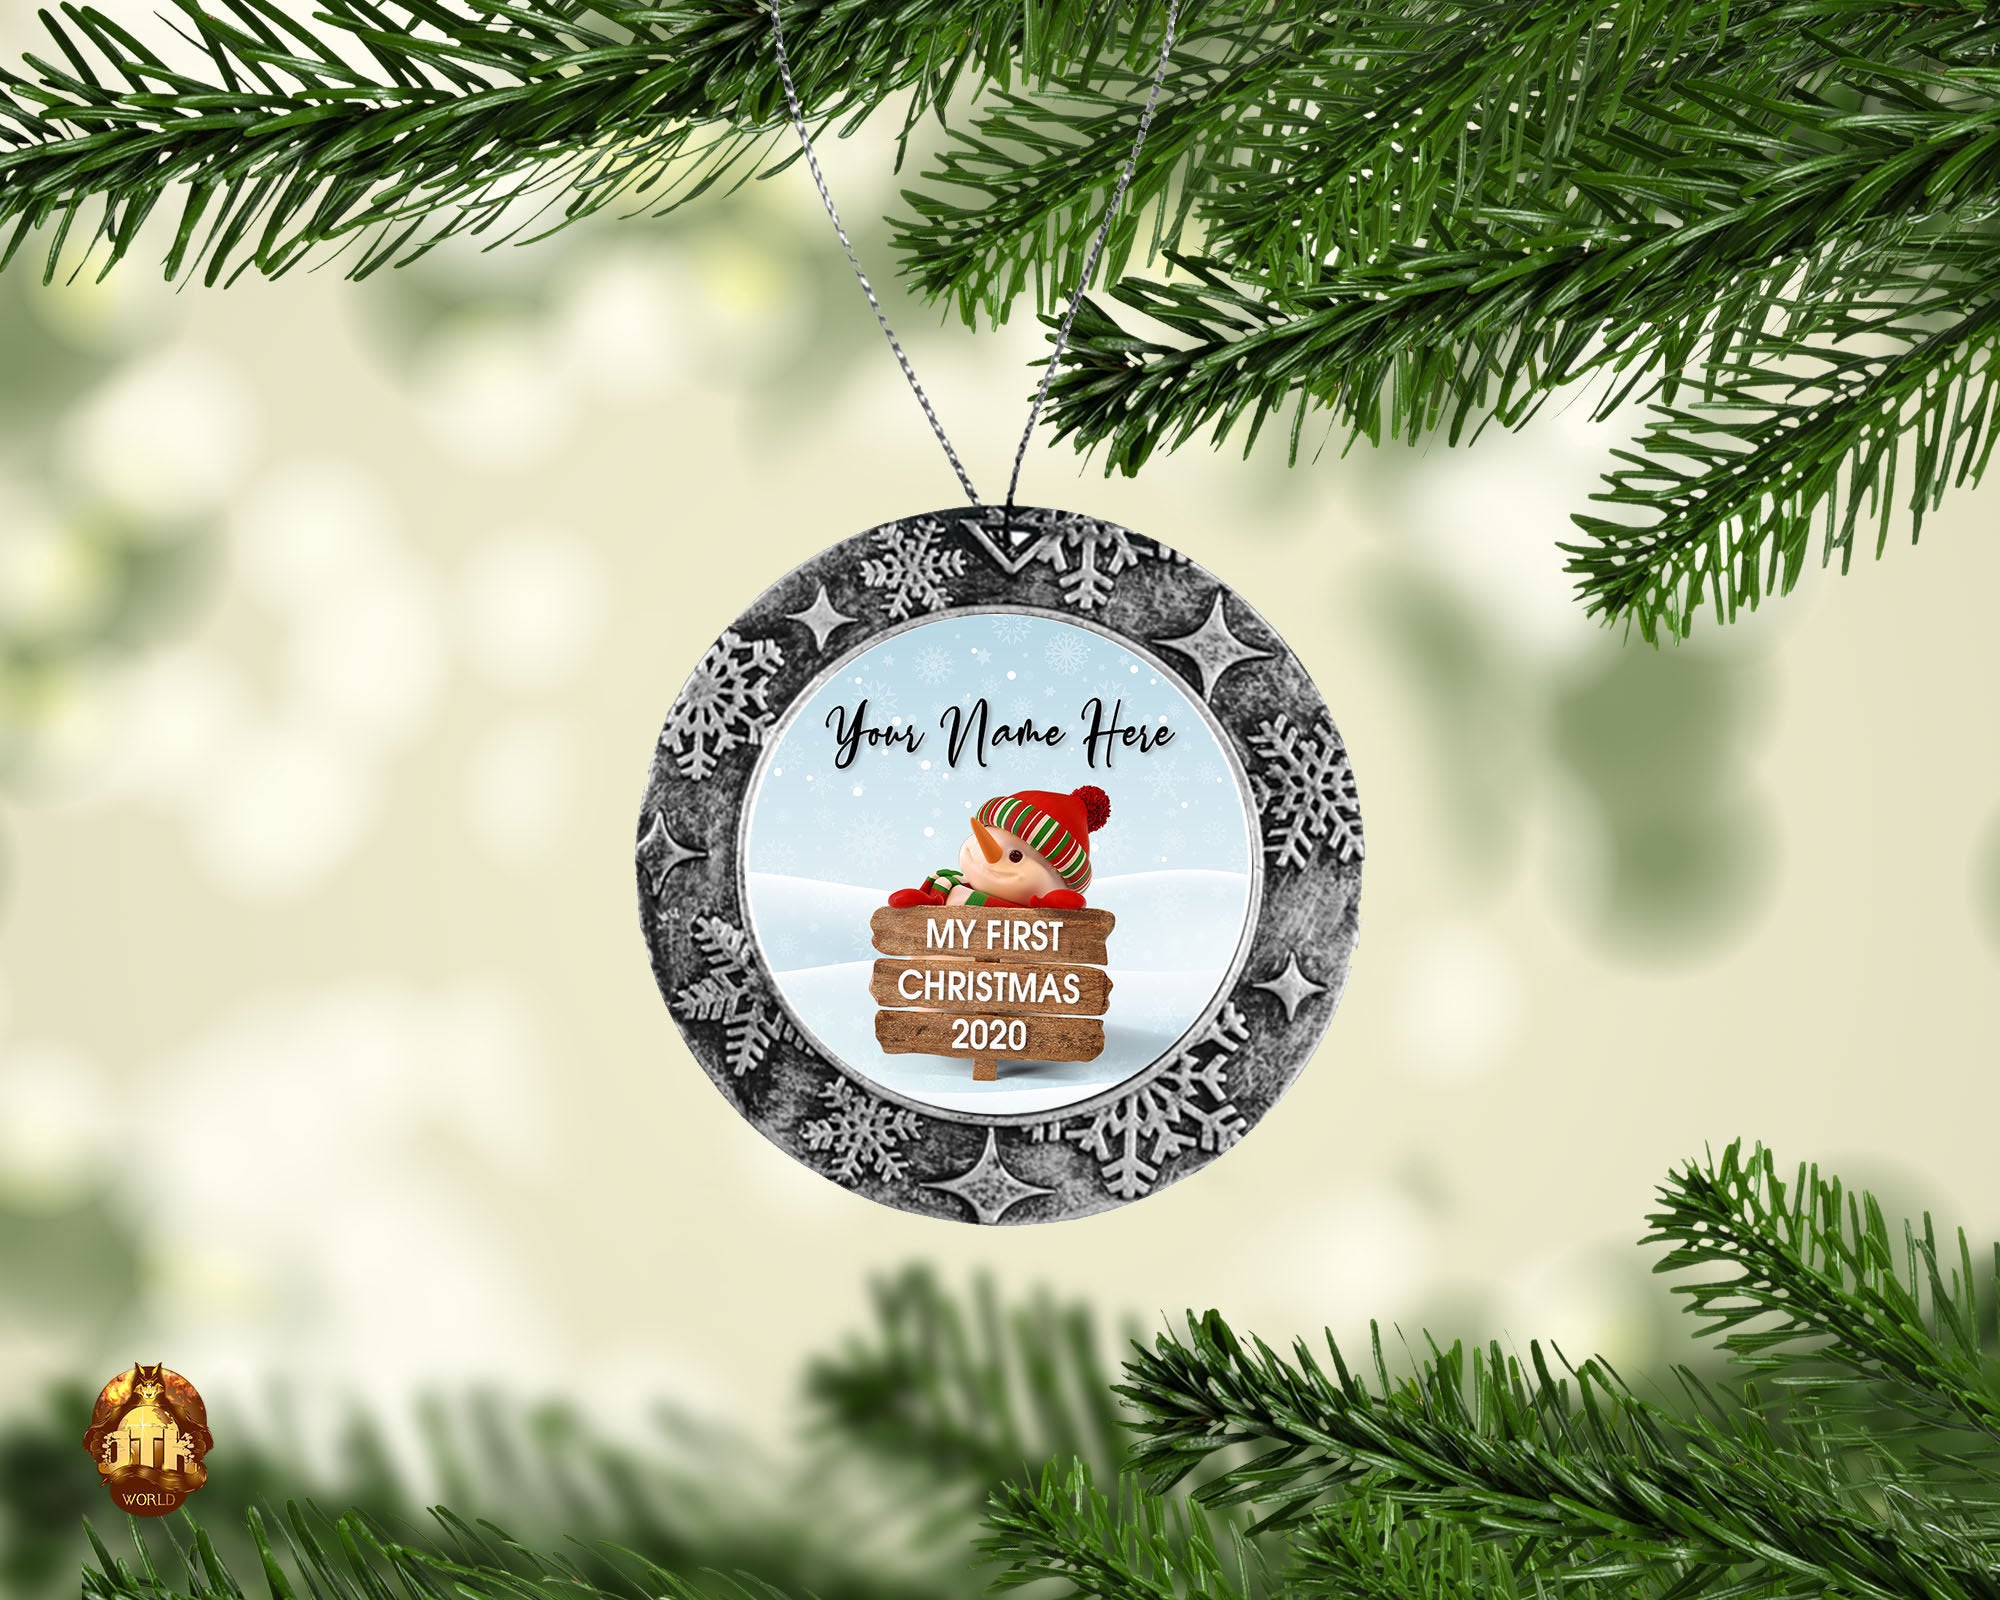 My First Christmas Silver Circle Ornament - Custom Baby Photo Ornament - Baby Christmas Photo Ornament - My First Ornament - Add Your Name